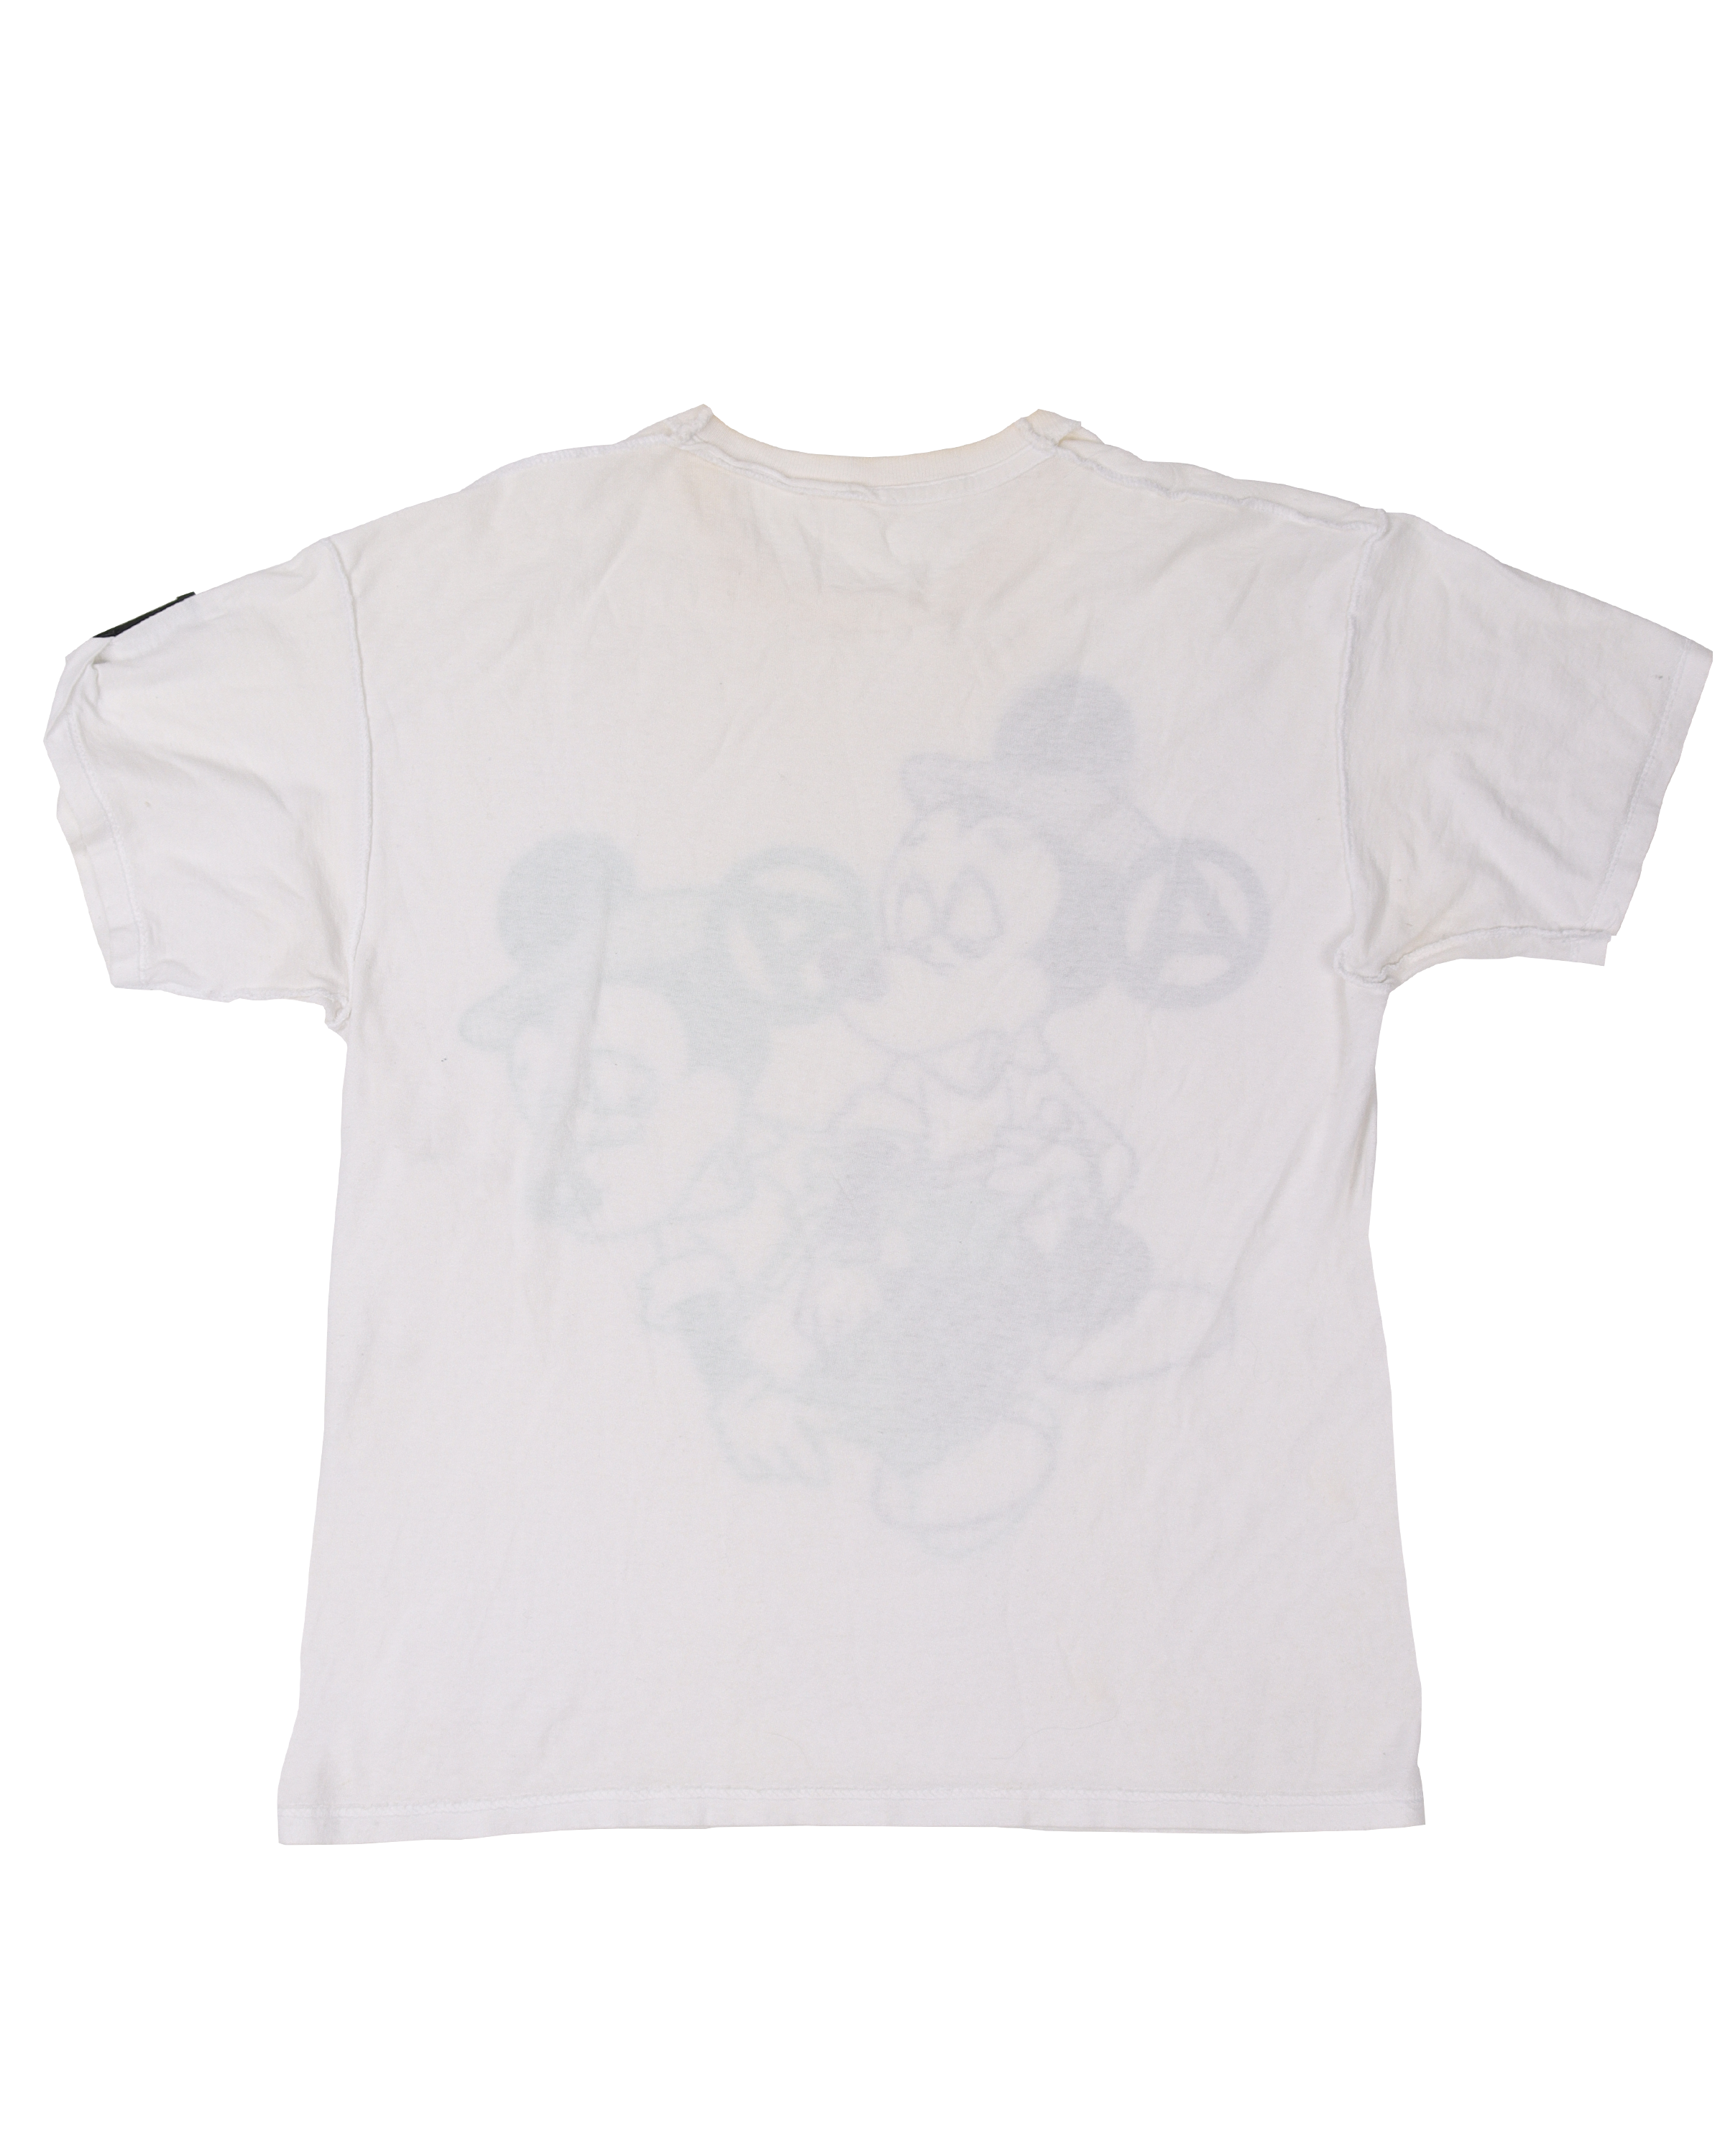 1970s Seditionaries Drugged Mickey Mouse T-Shirt